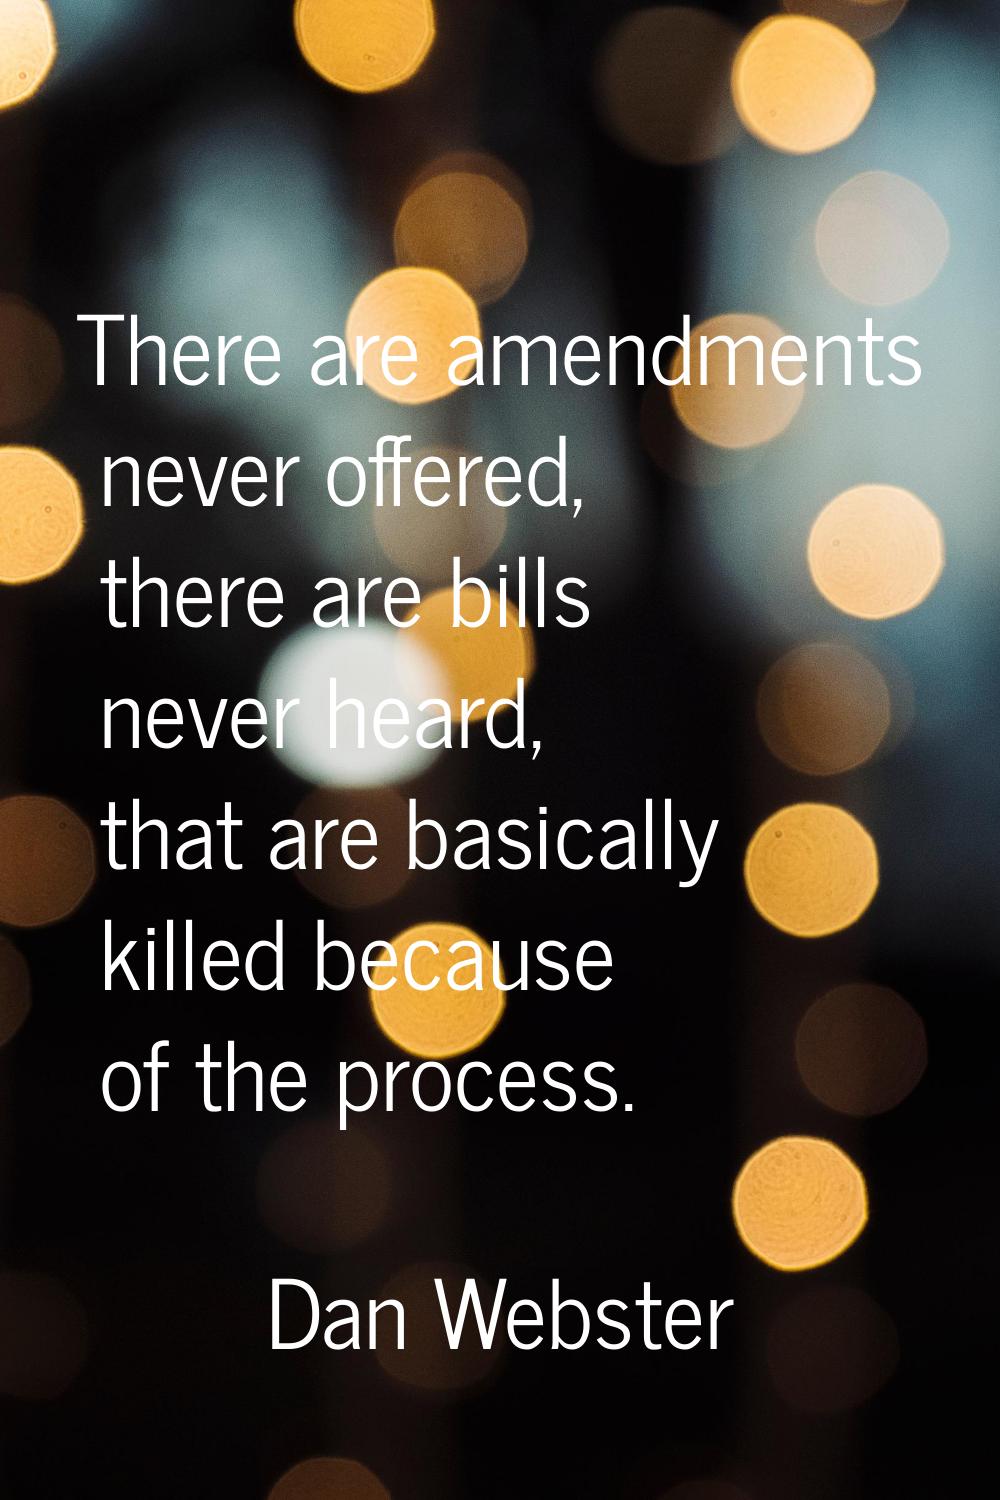 There are amendments never offered, there are bills never heard, that are basically killed because 